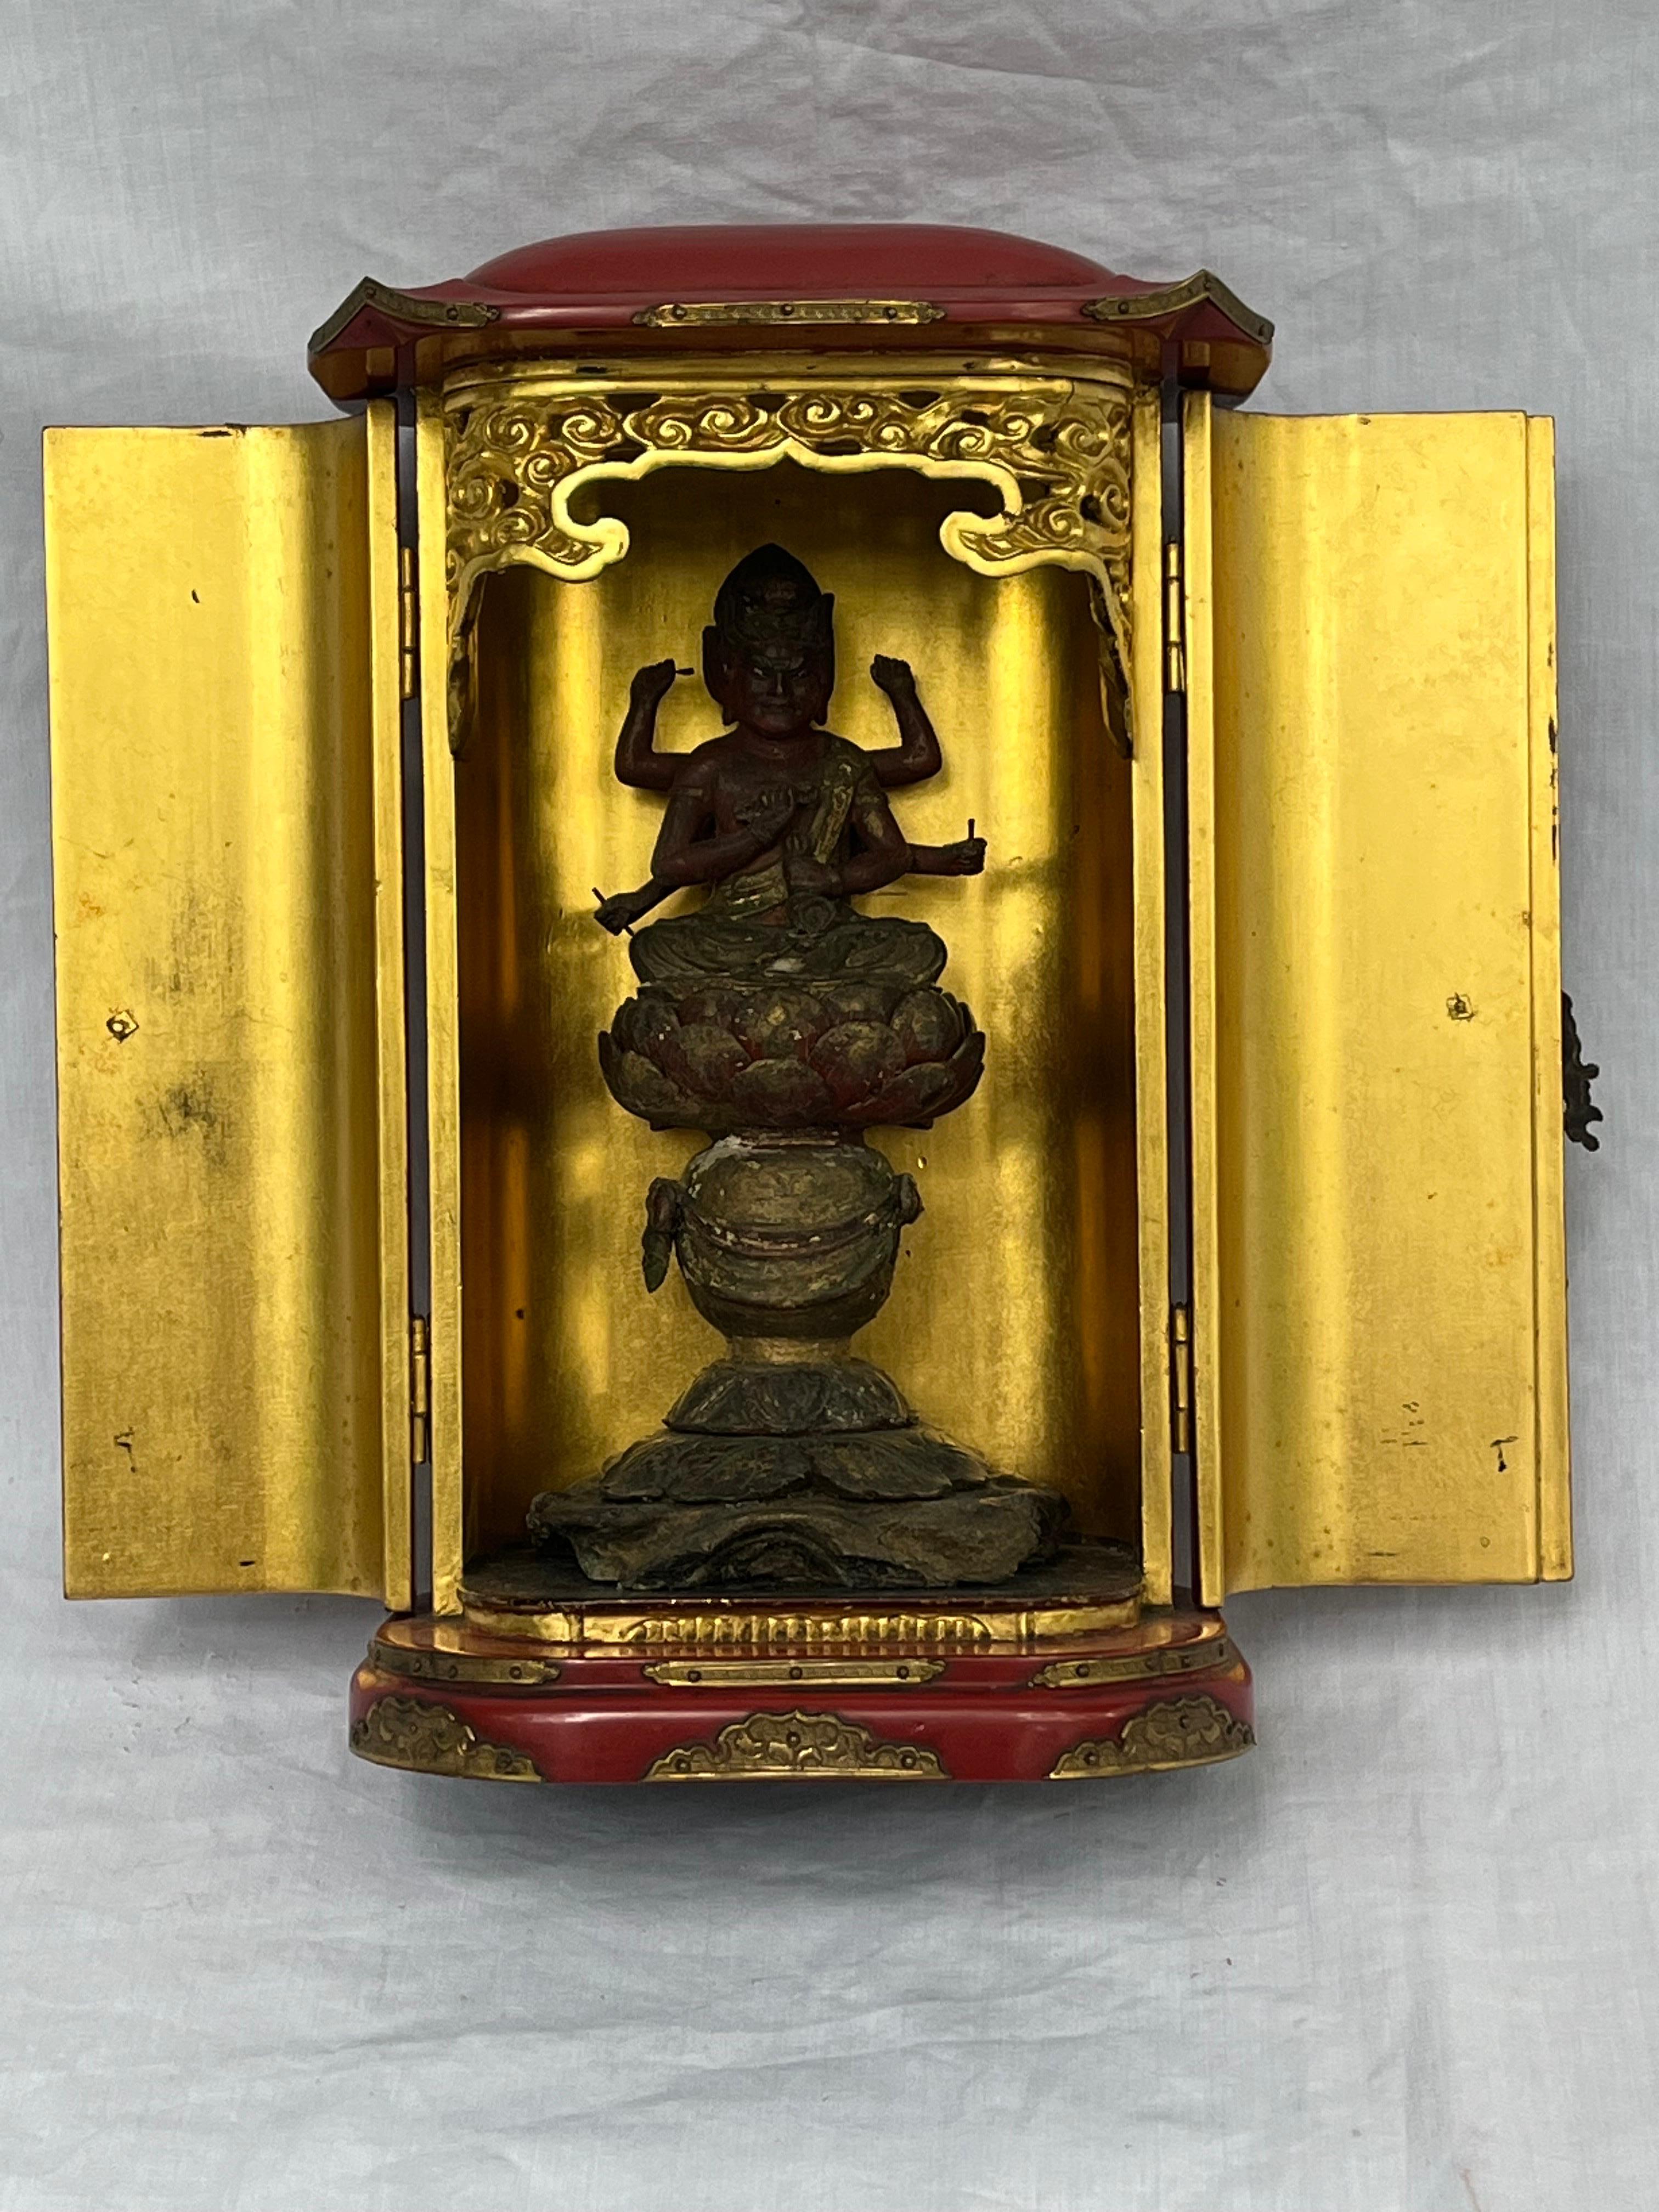 An antique Japanese traveling altar of Aizen Myoo or Ragaraja. I believe the object to be older than the 'early 20th century' guess I offered, but I'm really not sure. The carved deity sits inside the red lacquered altar, doors easily open and